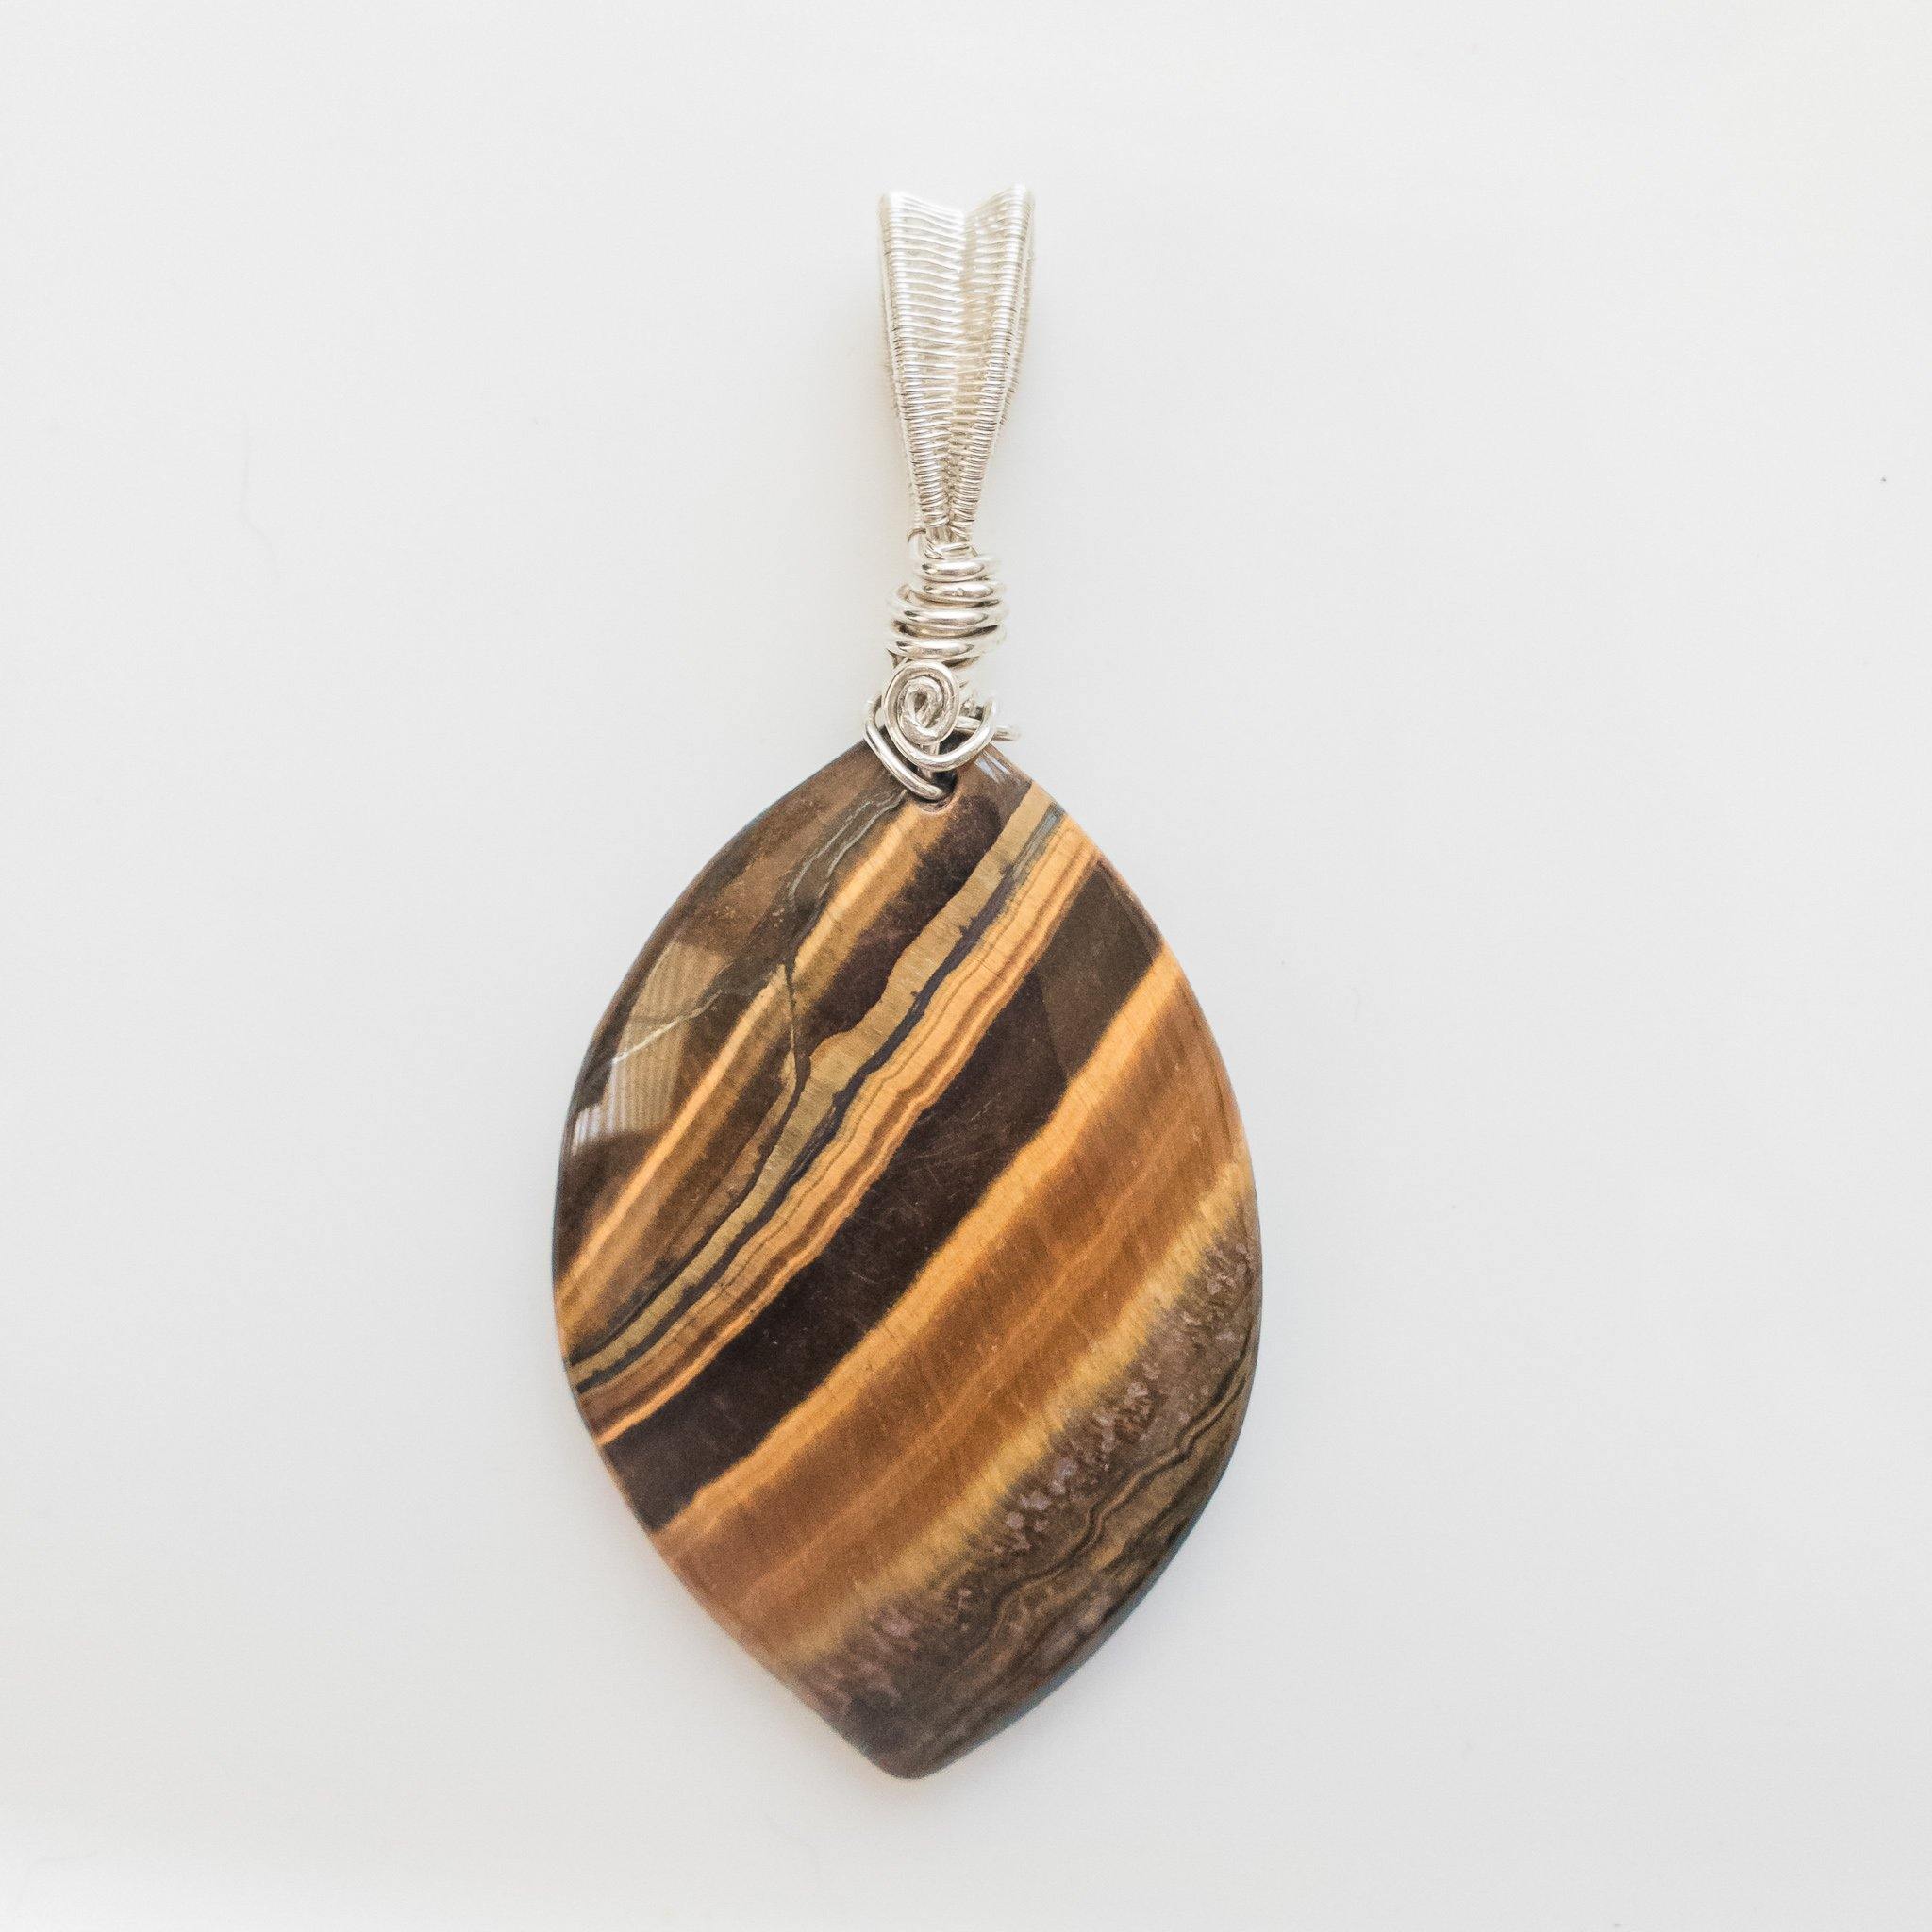 Powerful Tiger Eye Protection Stone Necklace - close up view - BellaChel Jeweler